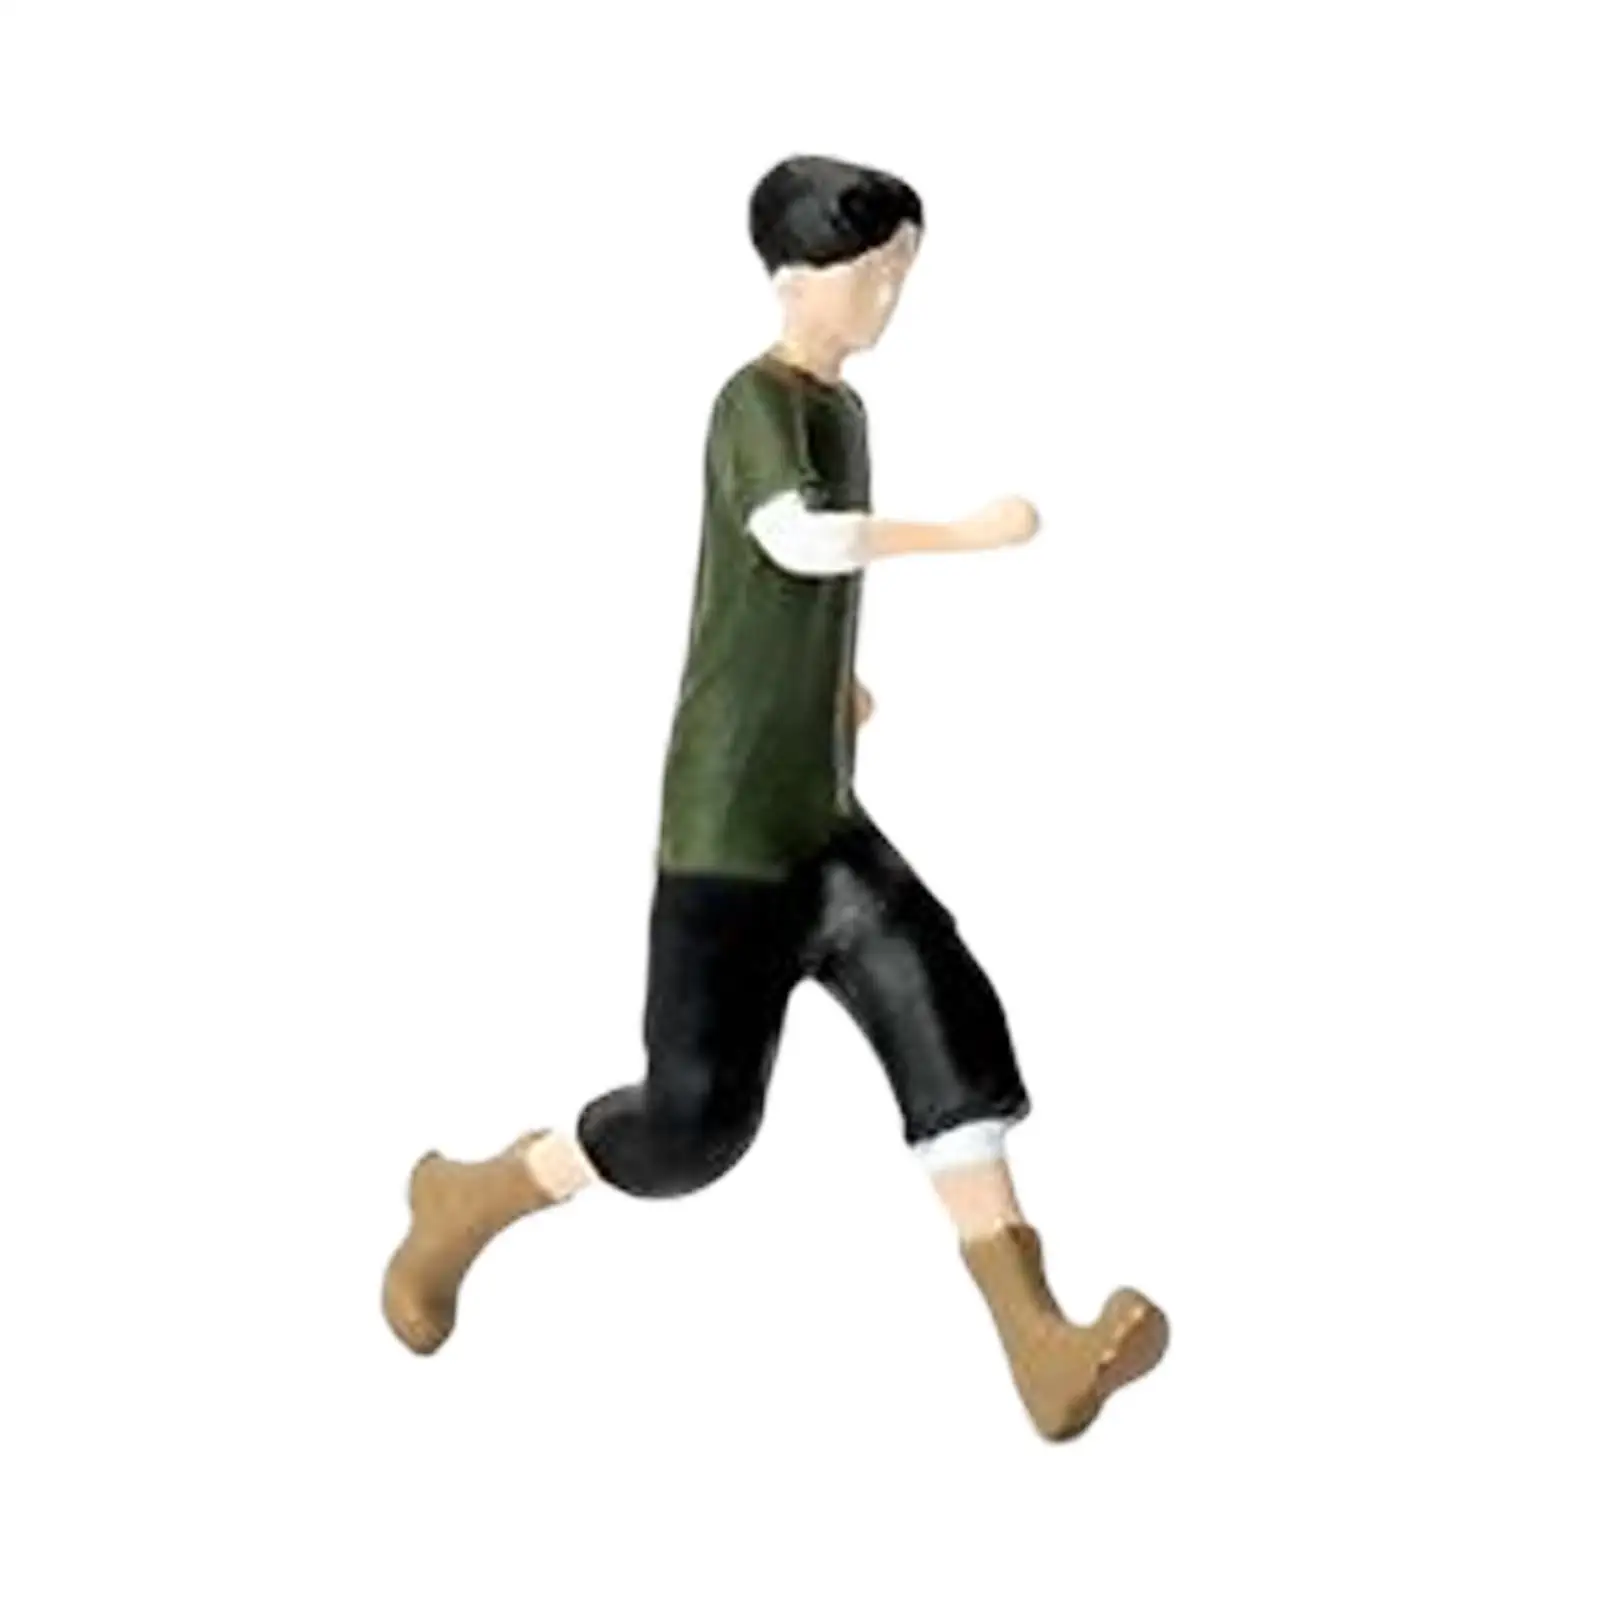 Miniature 1/64 Scale Model Toy Tiny Running Boy for Dollhouse Decor Collectibles